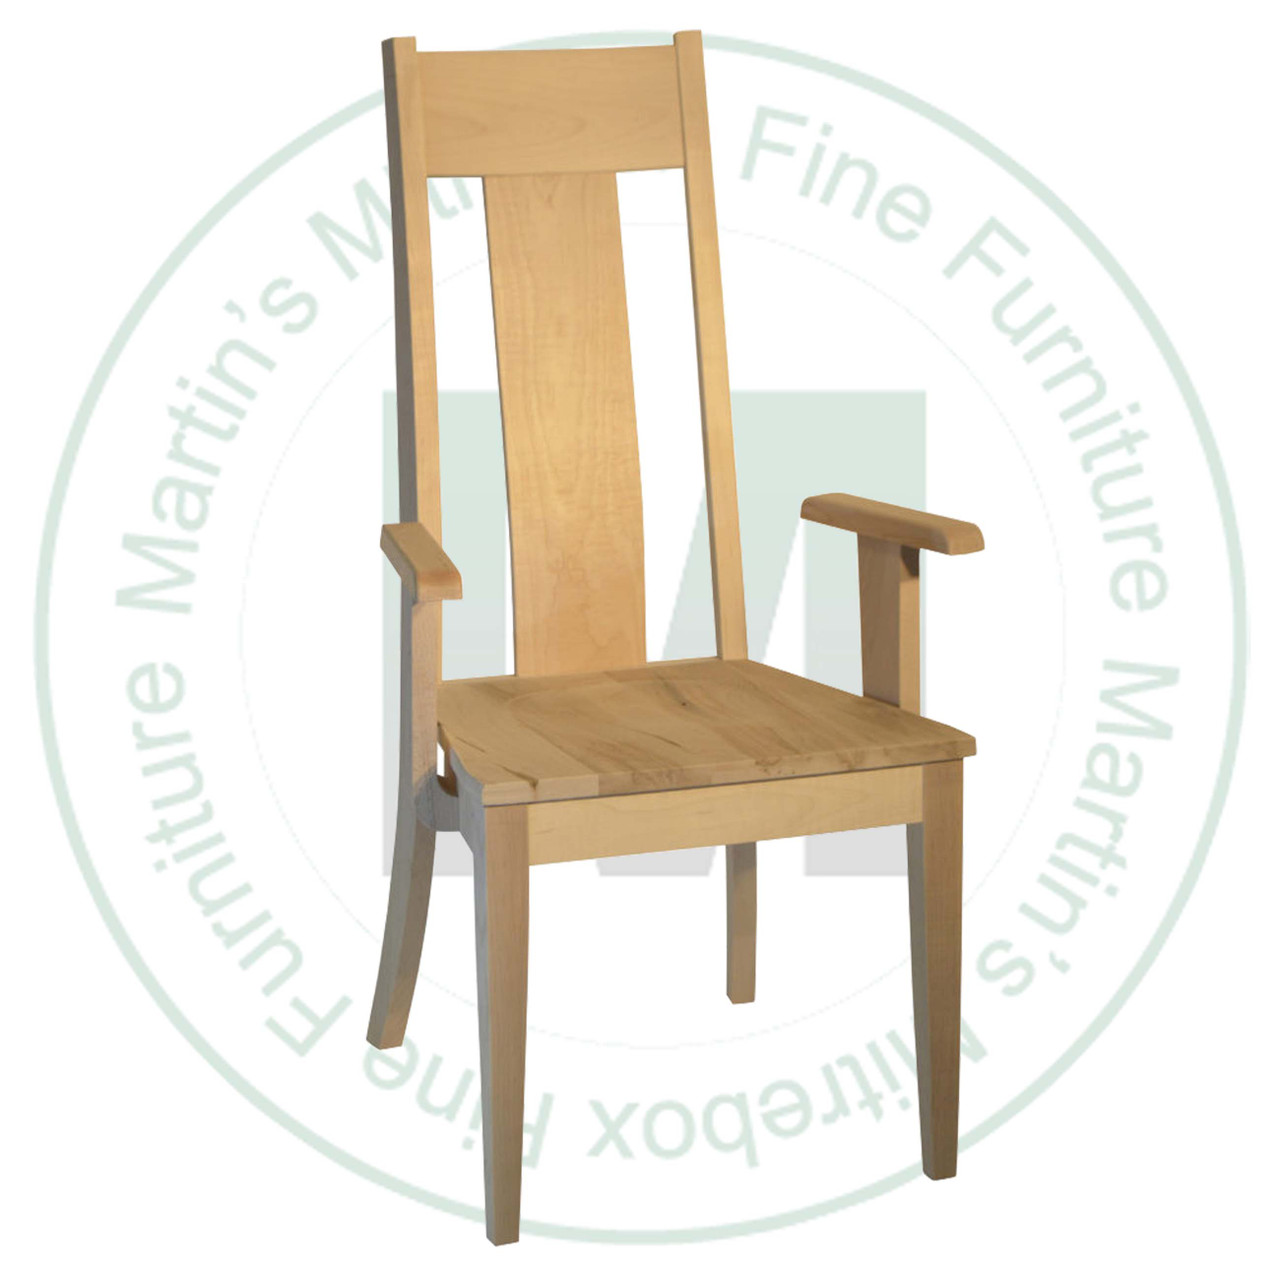 Maple Tracey Arm Chair With Wood Seat